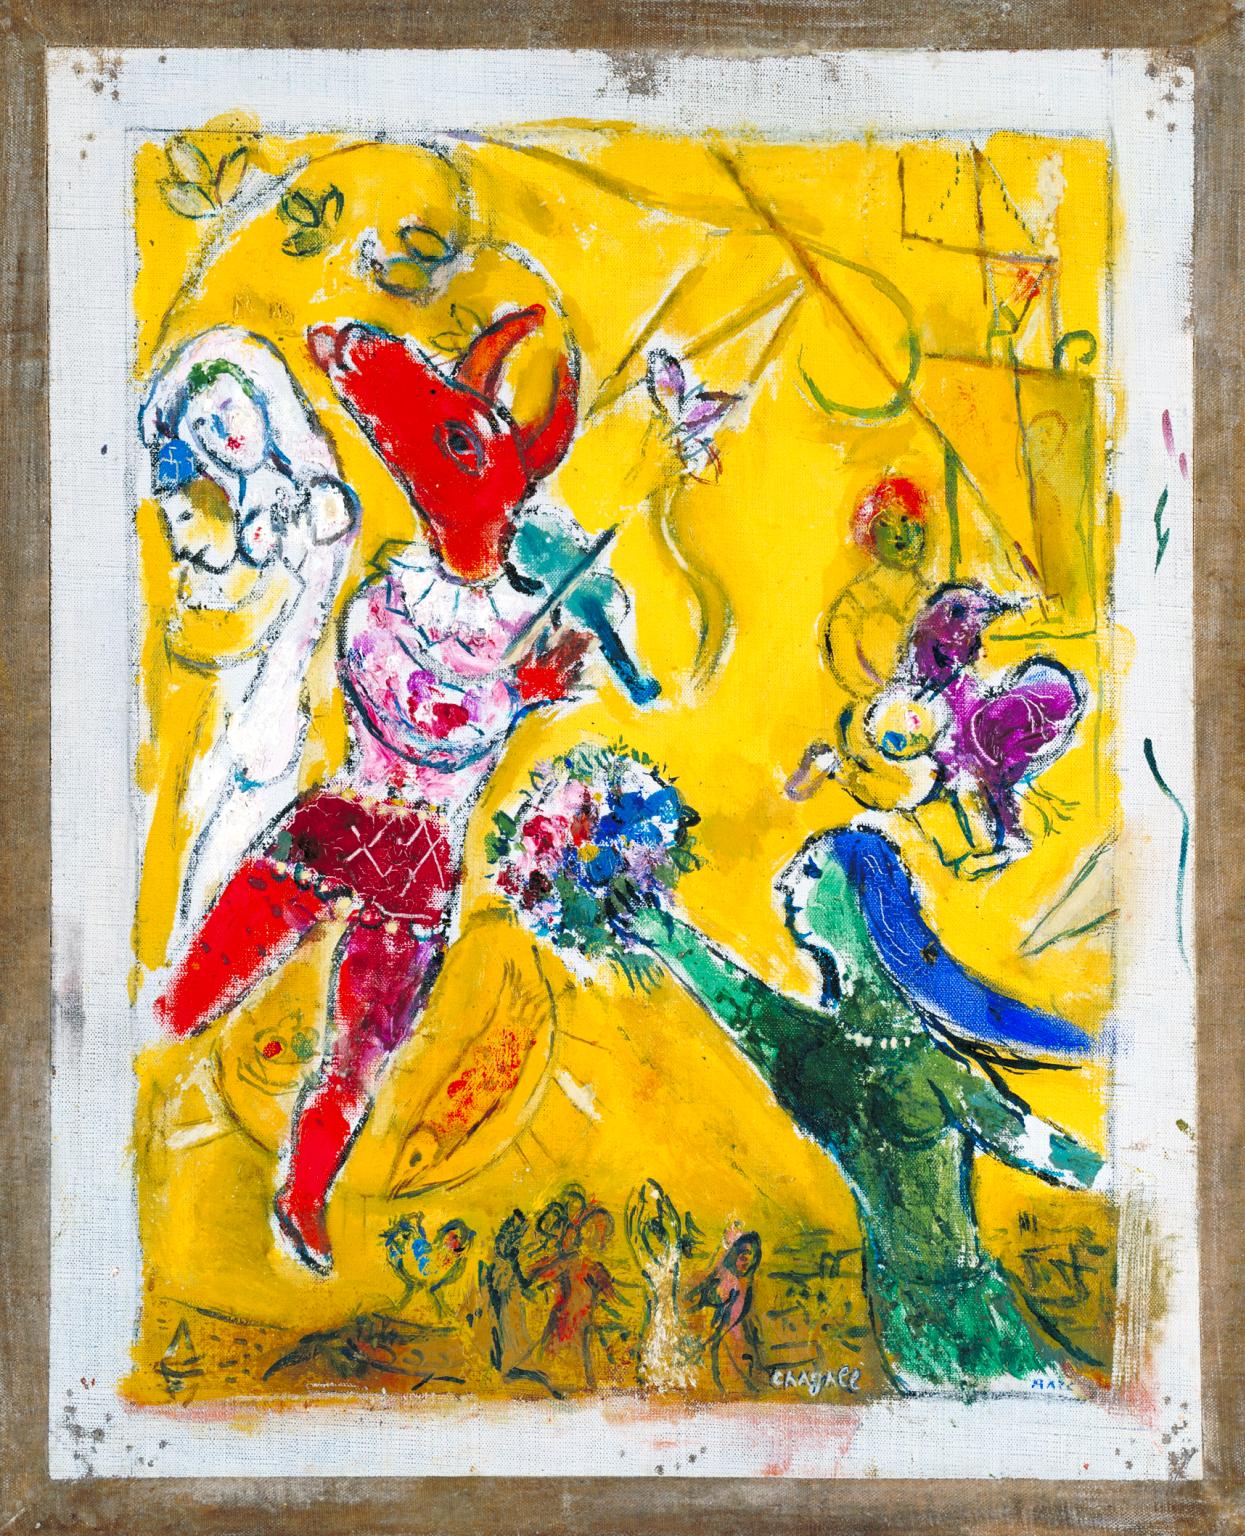 The Dance and the Circus 1950 by Marc Chagall 1887-1985